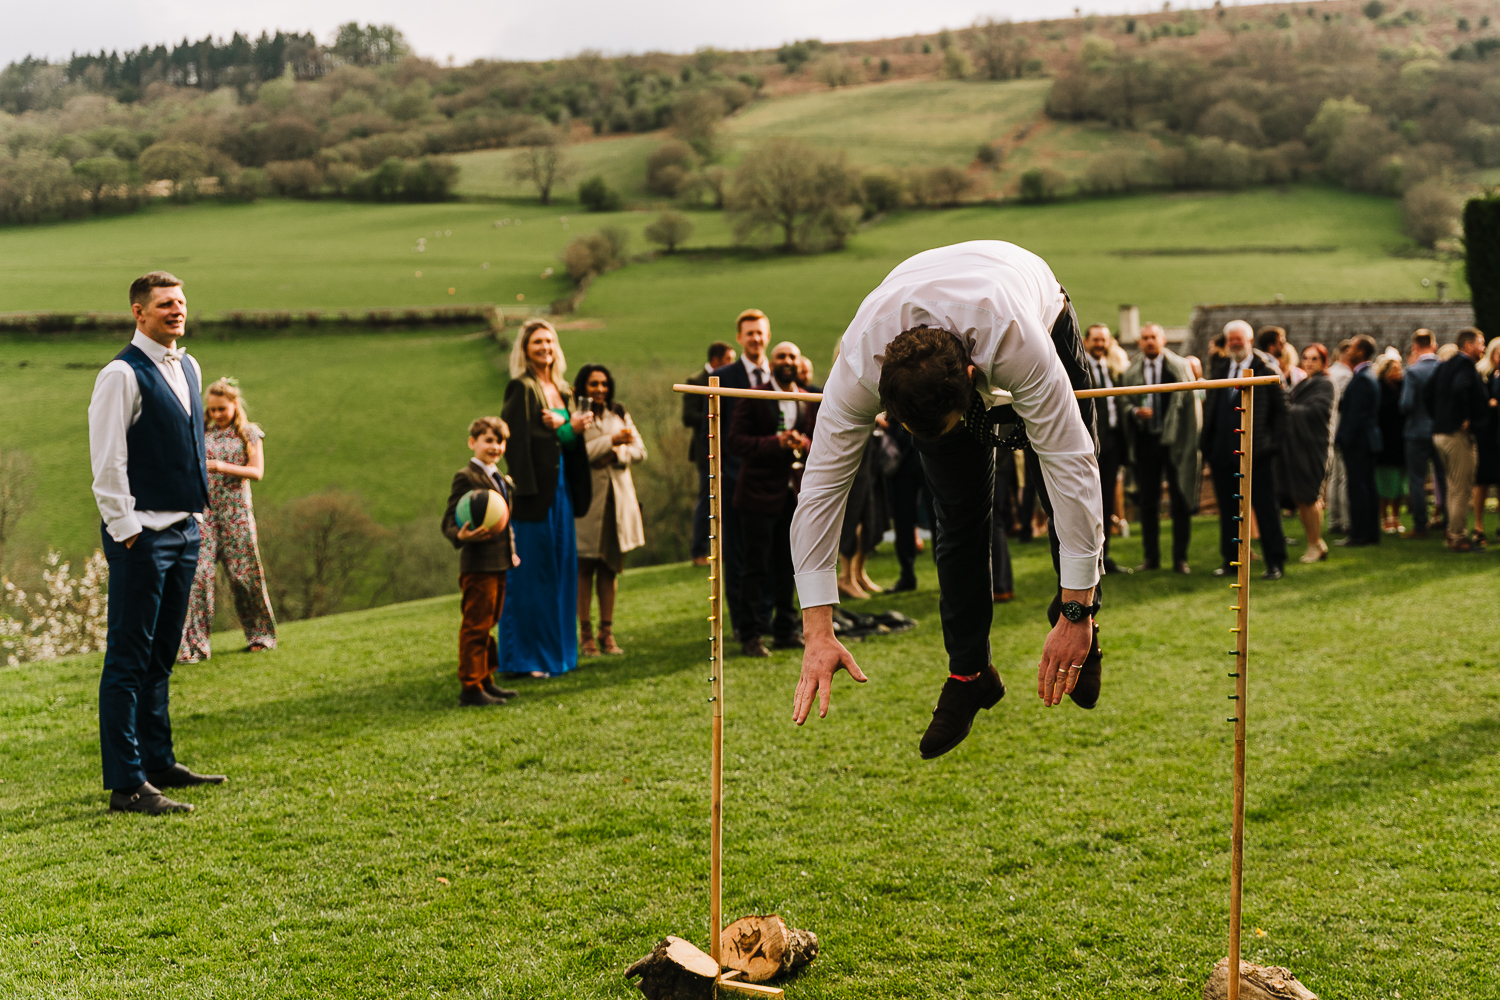 Groom jumping over a pole